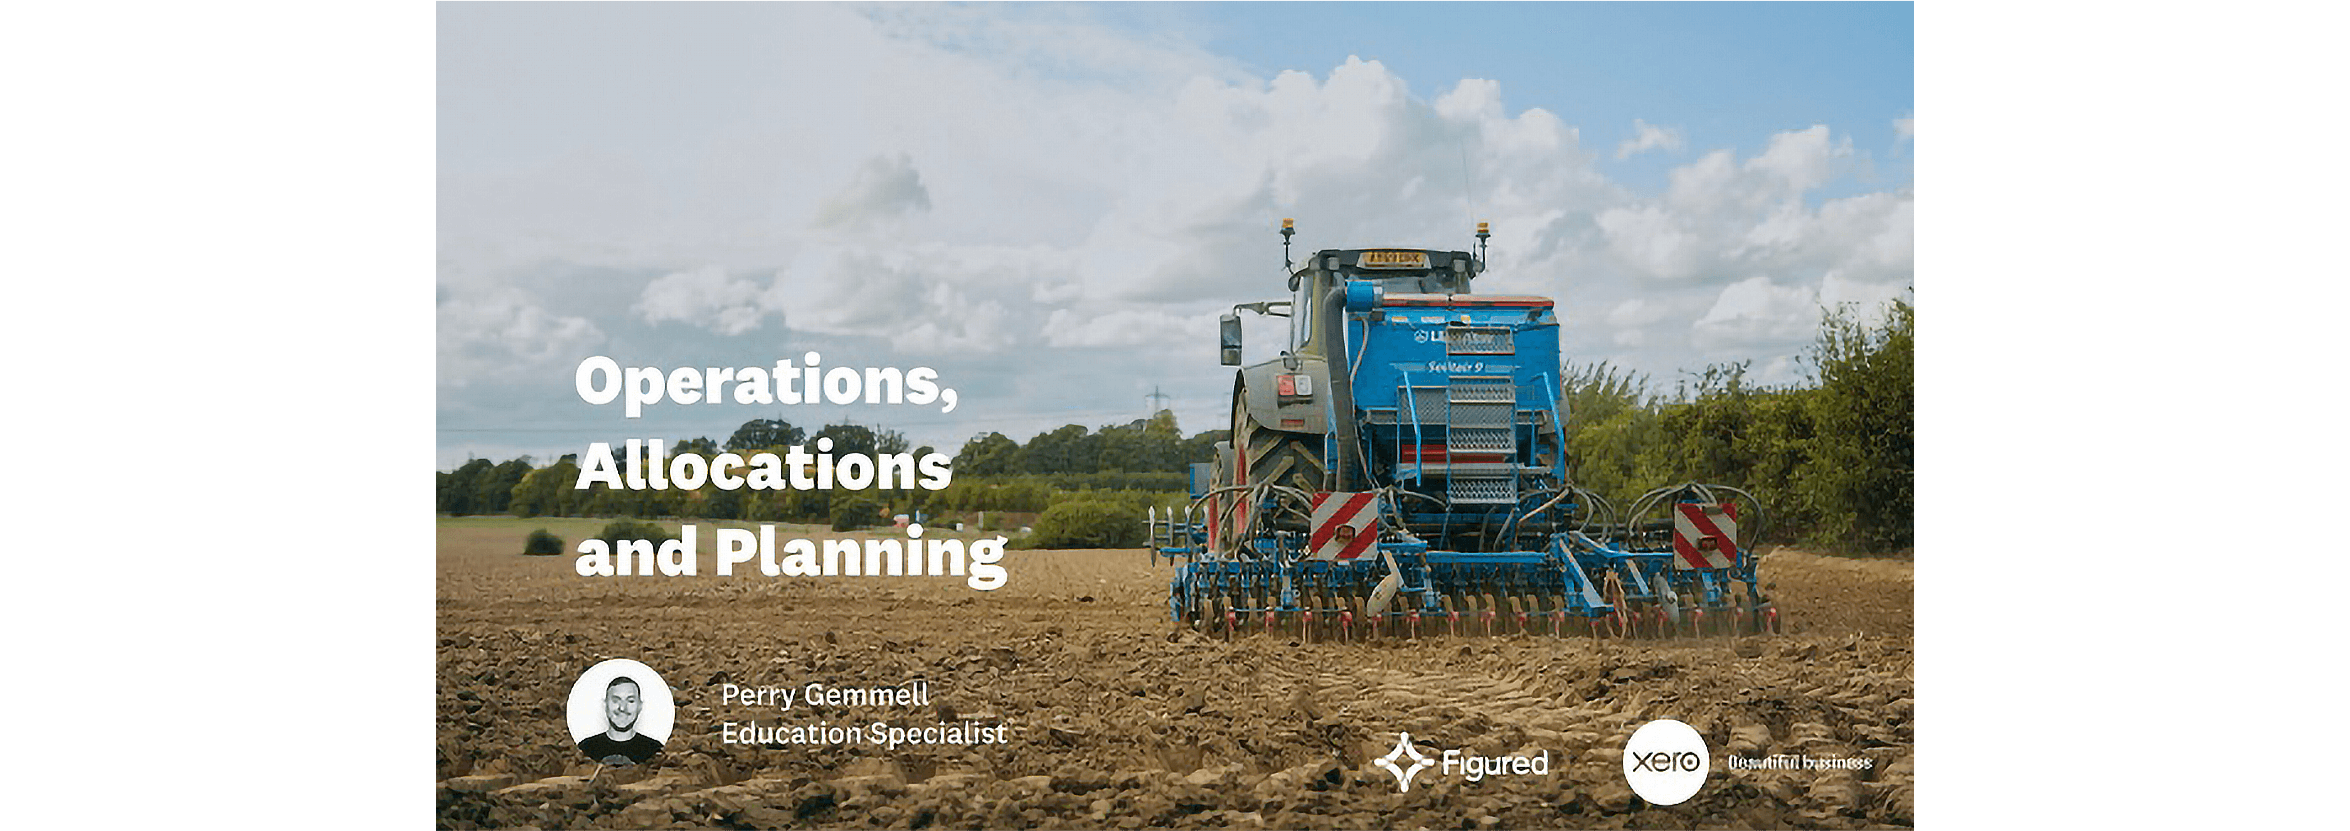 Operations, allocations and planning video still. A tractor ploughs a field.